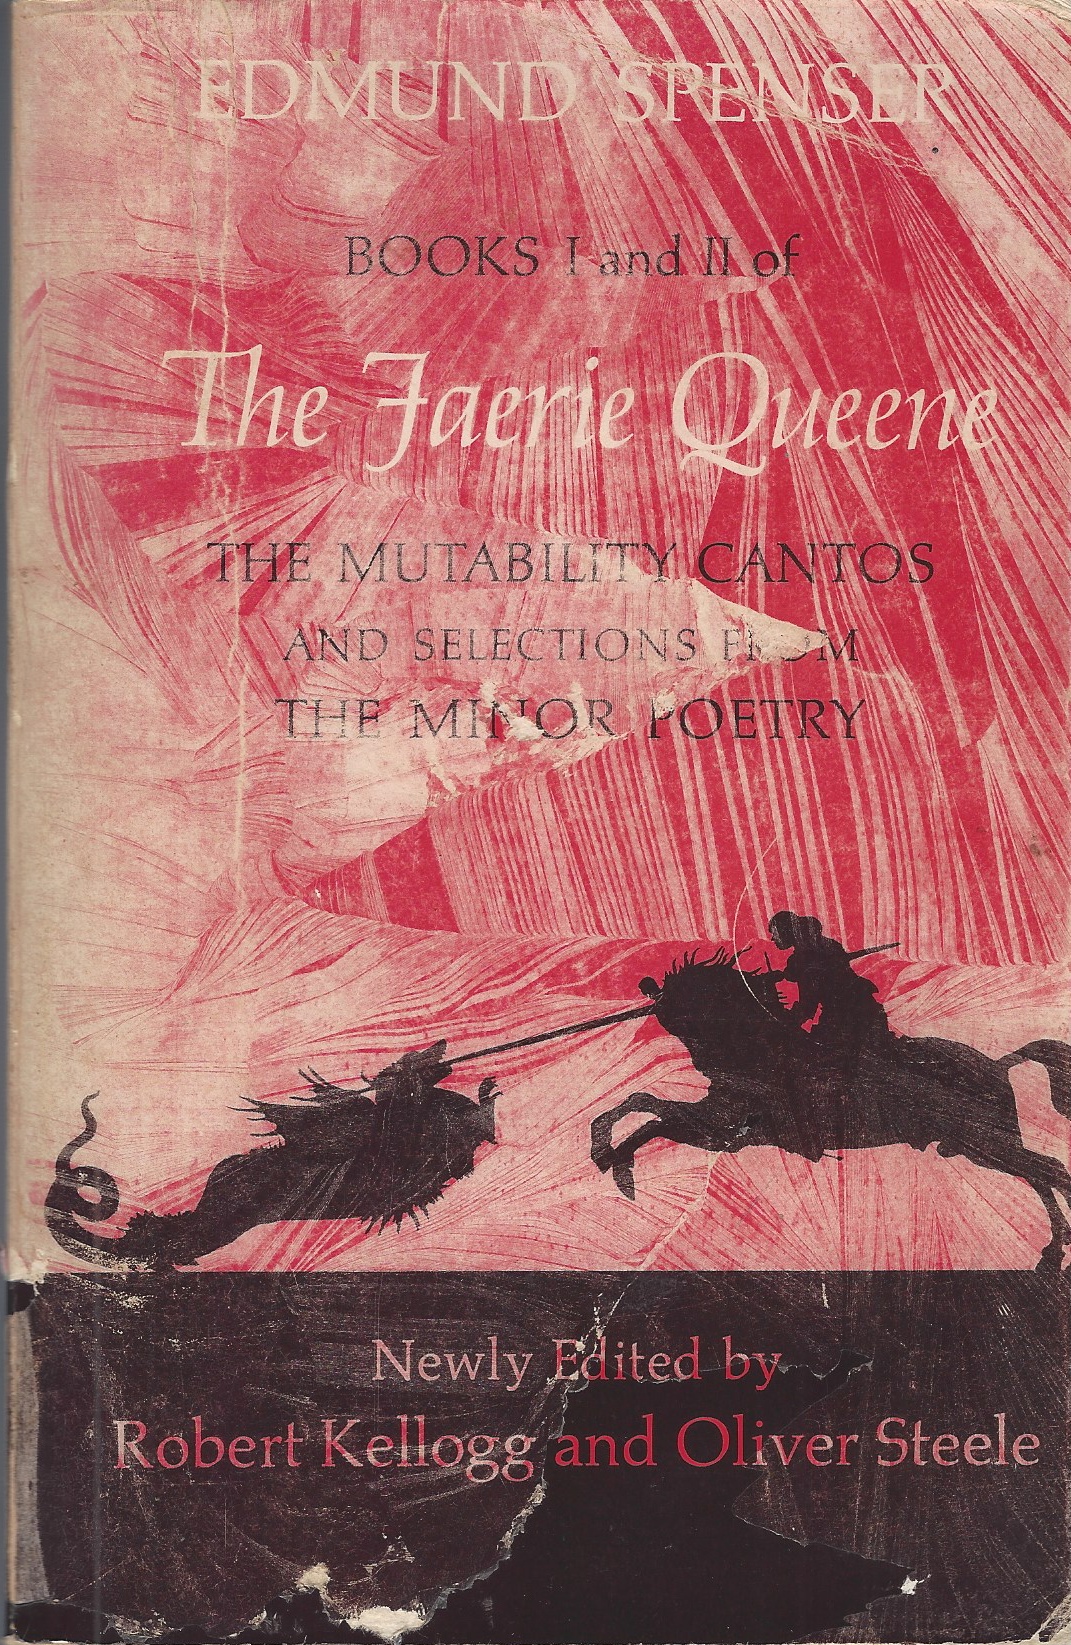 SPENSER EDMUND, KELLOGG ROBERT, STEELE OLIVER (EDITORS) - Faerie Queene the, Books I & I I the Mutability Cantos and Selections from the Minor Poetry